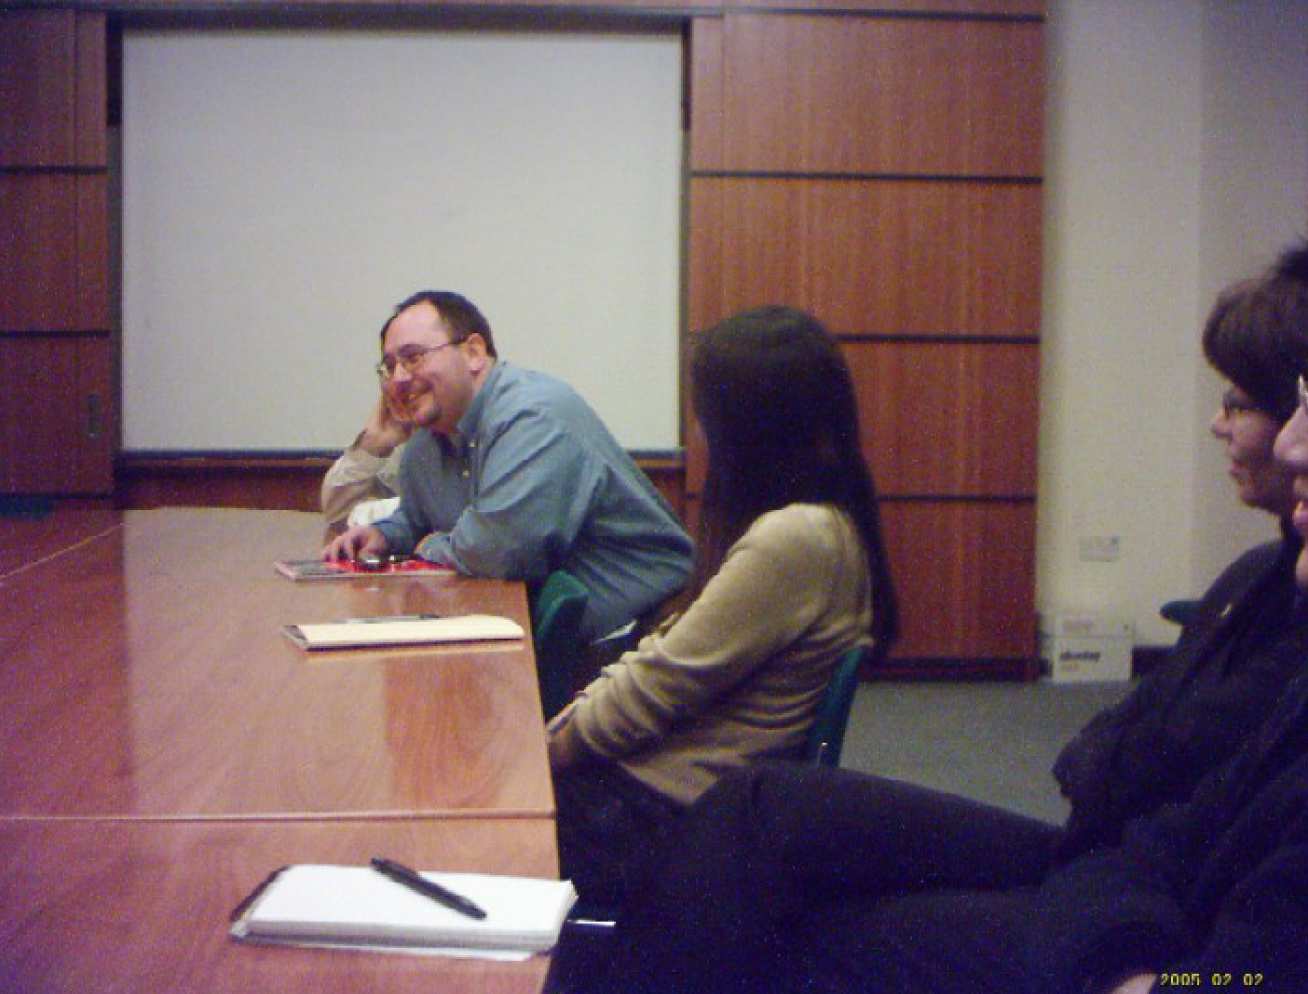 Research group meeting (Feb 05)